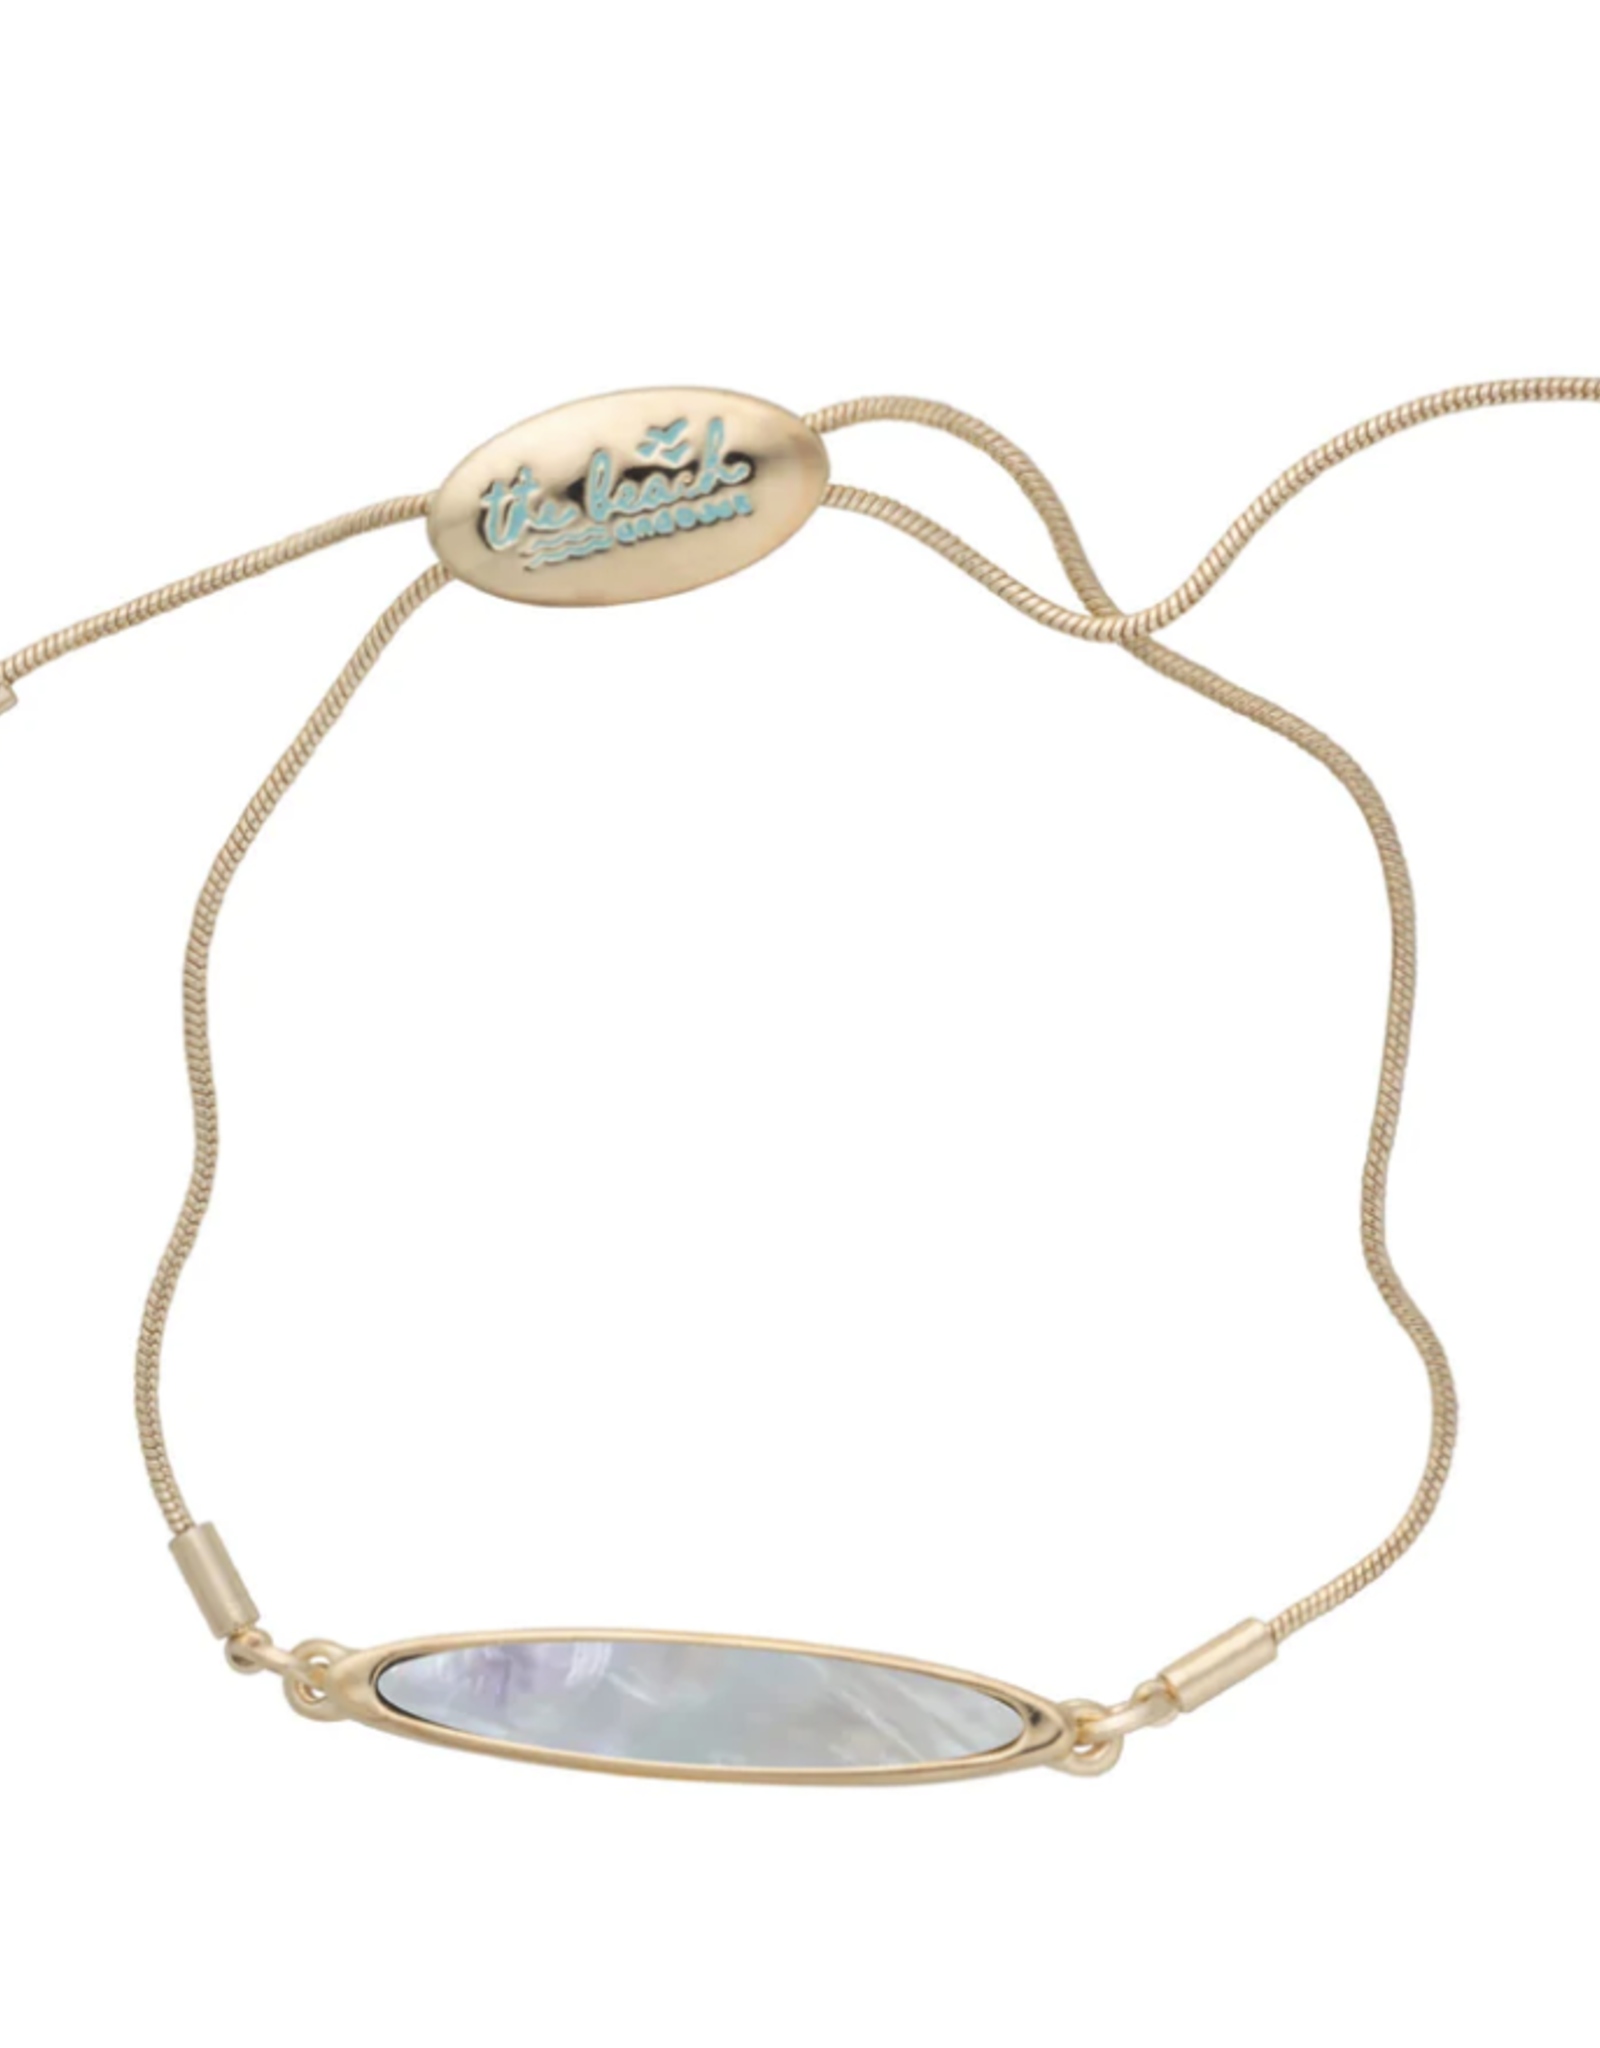 The Beach and Back Lavallette Long Board Mother of Pearl Bracelet